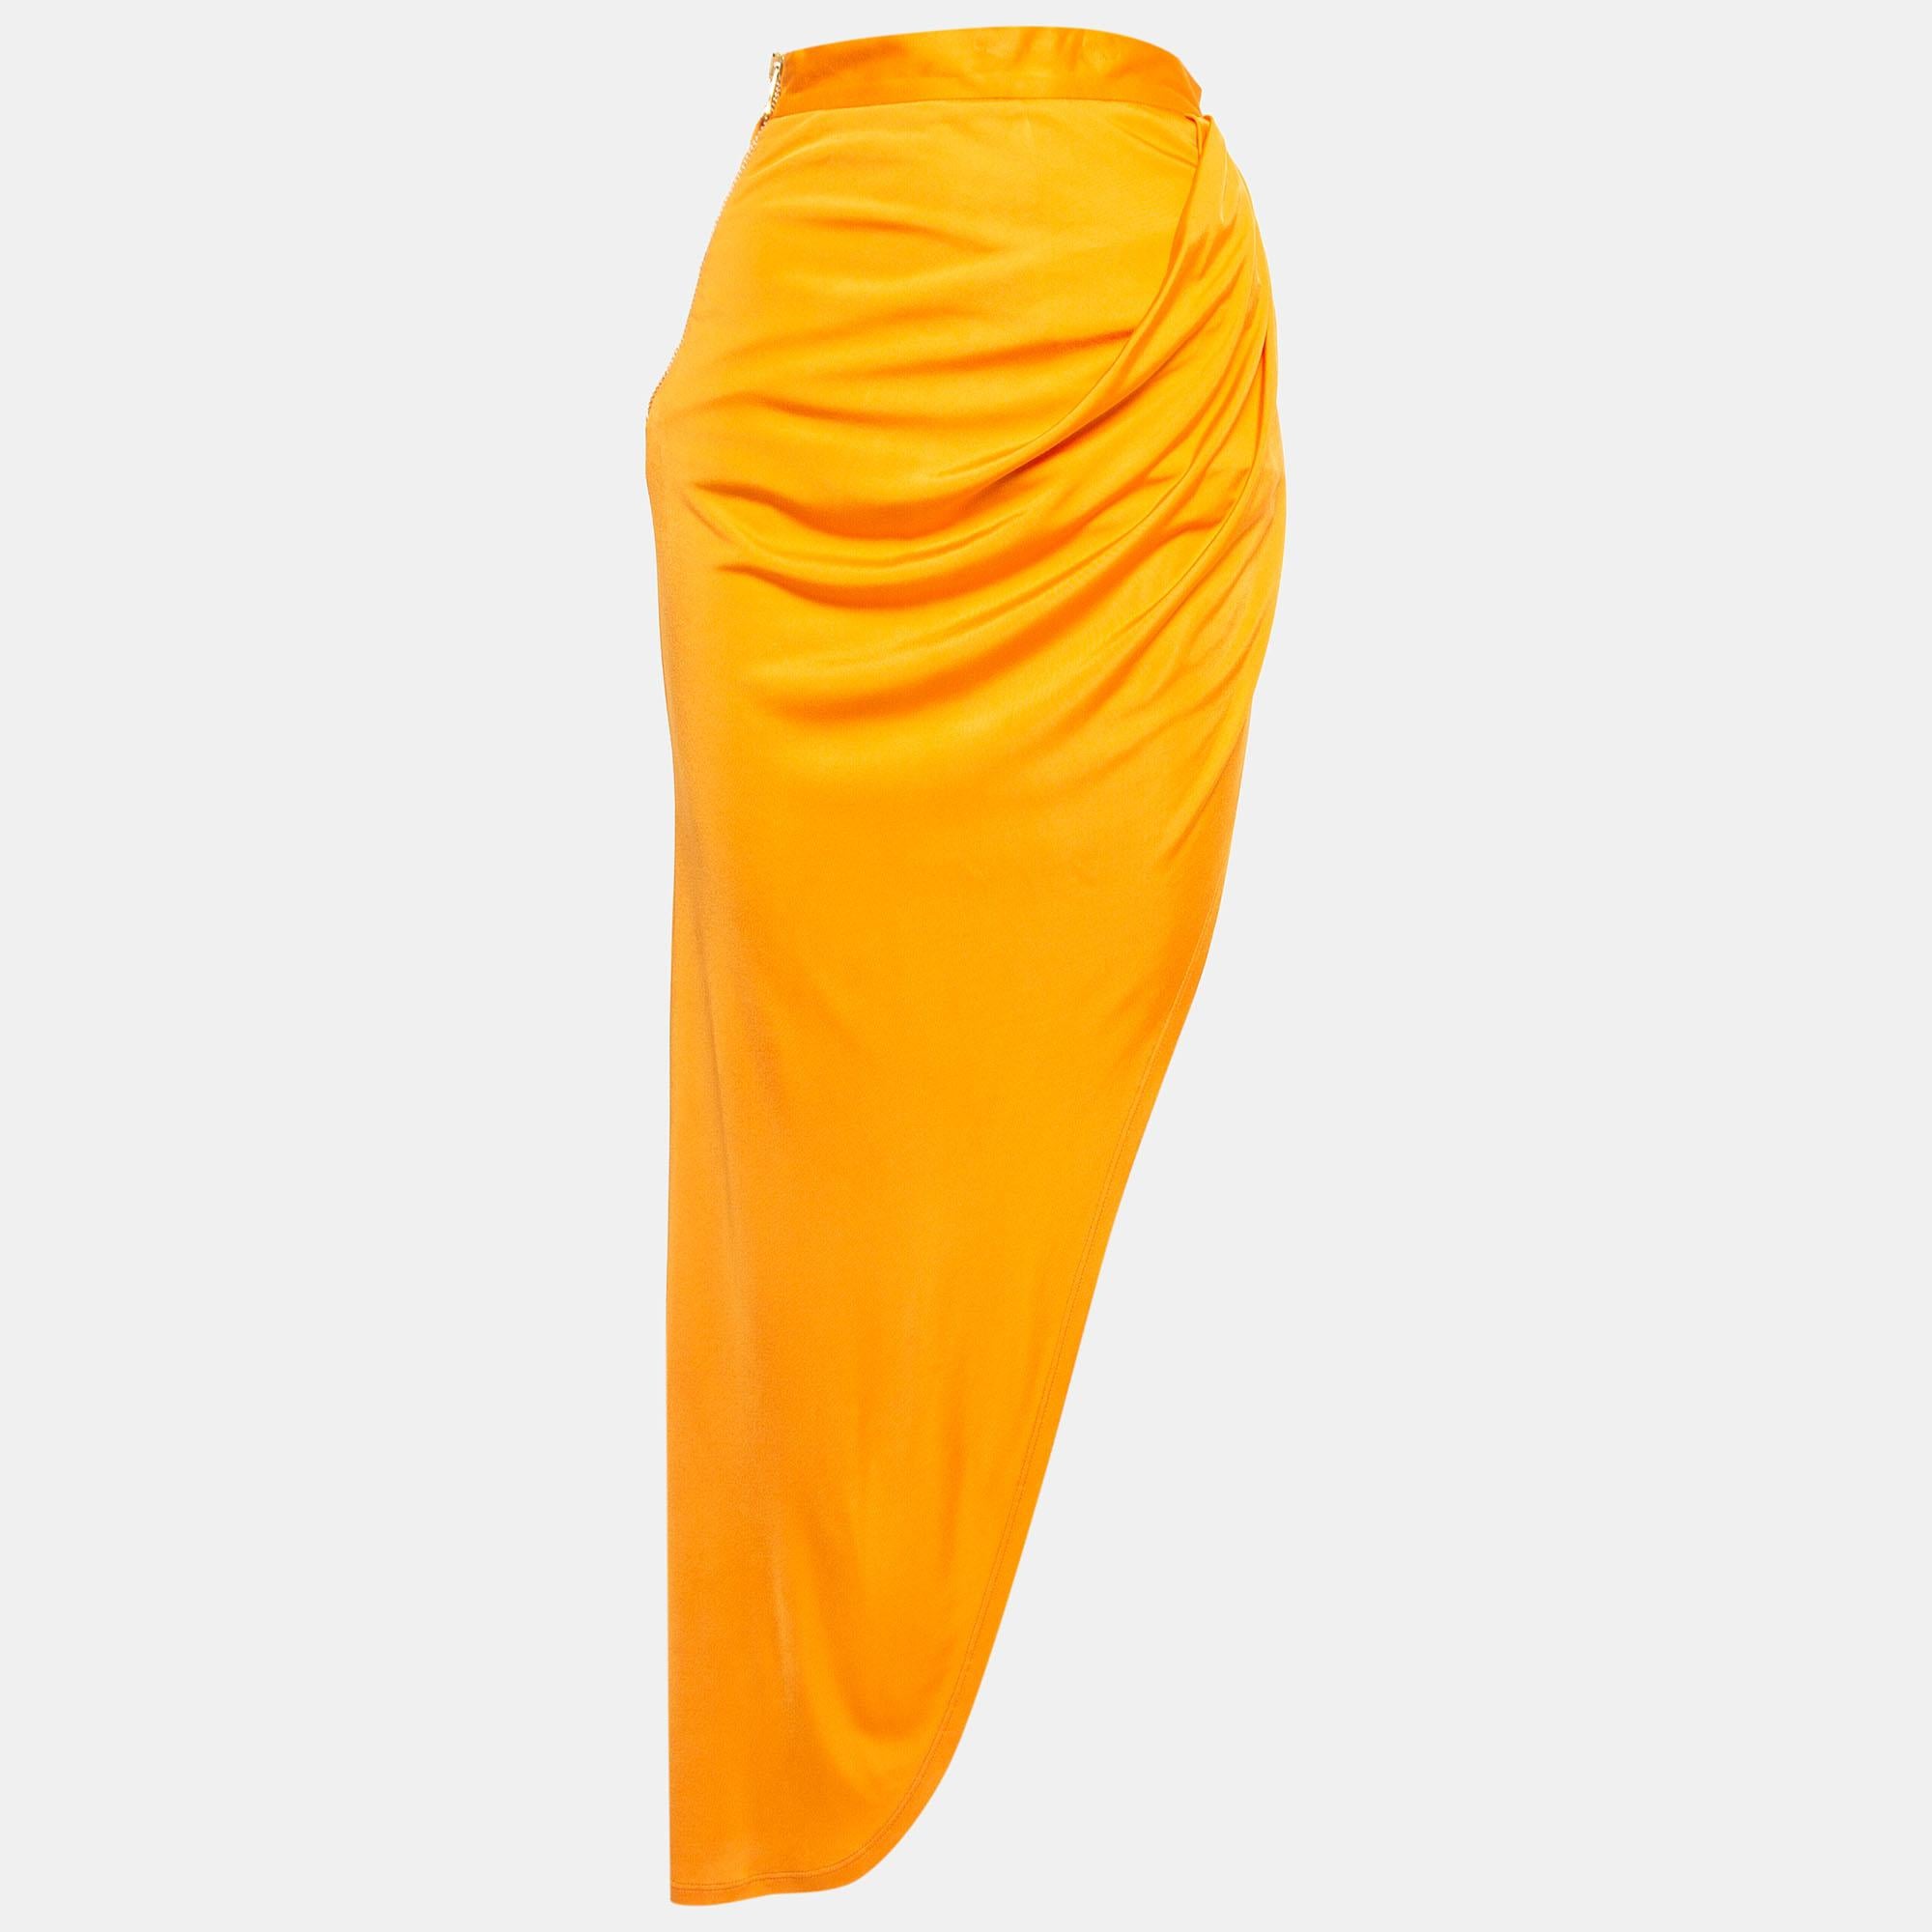 Tailored by Balmain, this vibrant orange jersey high slit draped maxi skirt exudes elegance and allure. Its flowing silhouette, adorned with a high slit, accentuates movement and grace. Perfect for making a statement, this piece effortlessly